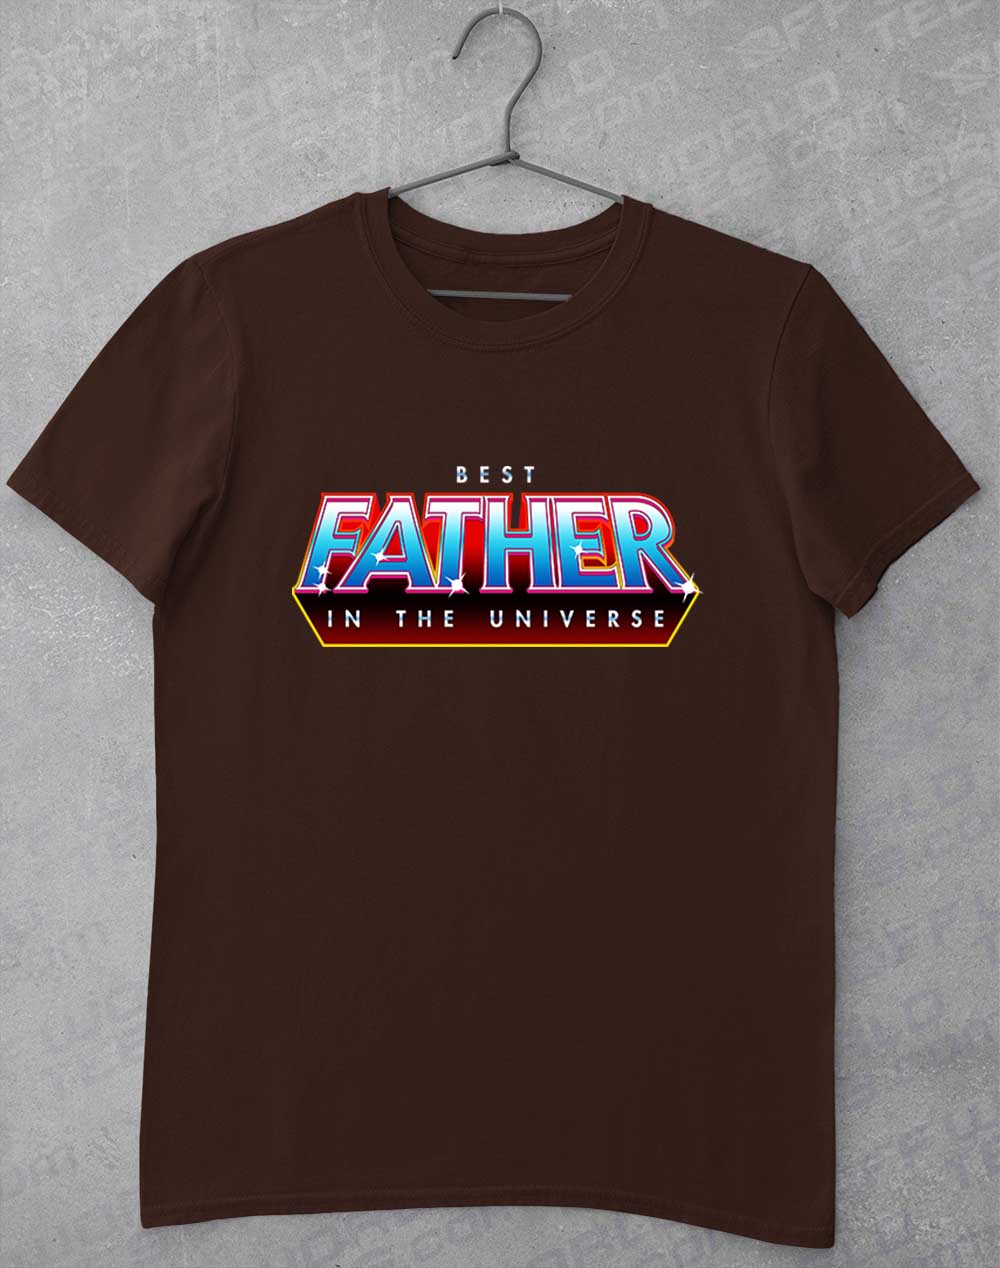 Dark Chocolate - Best Father in the Universe T-Shirt